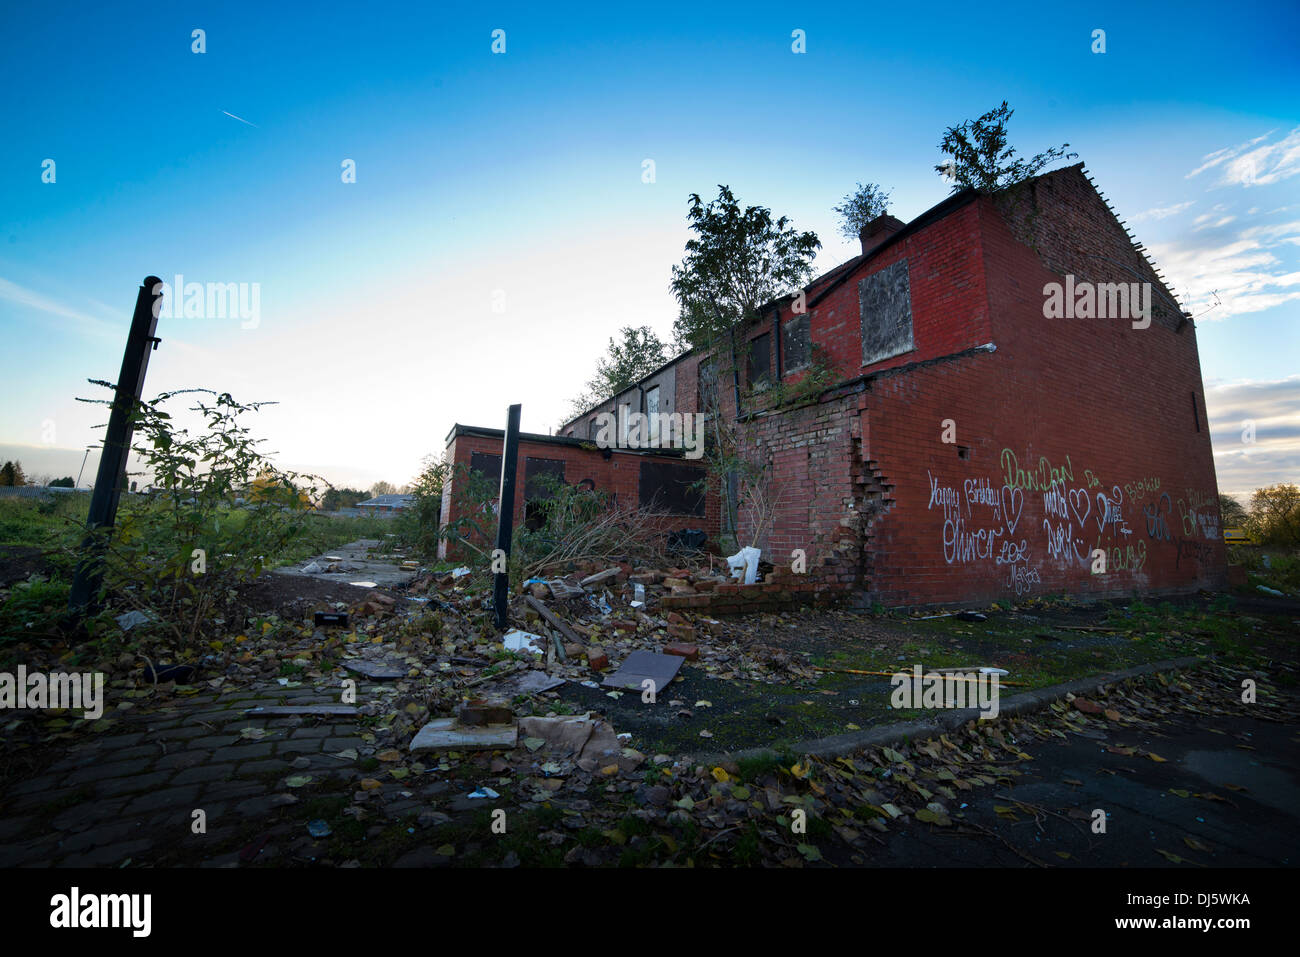 Derelict houses waiting for demolition, urban renewal and regeneration. Stock Photo